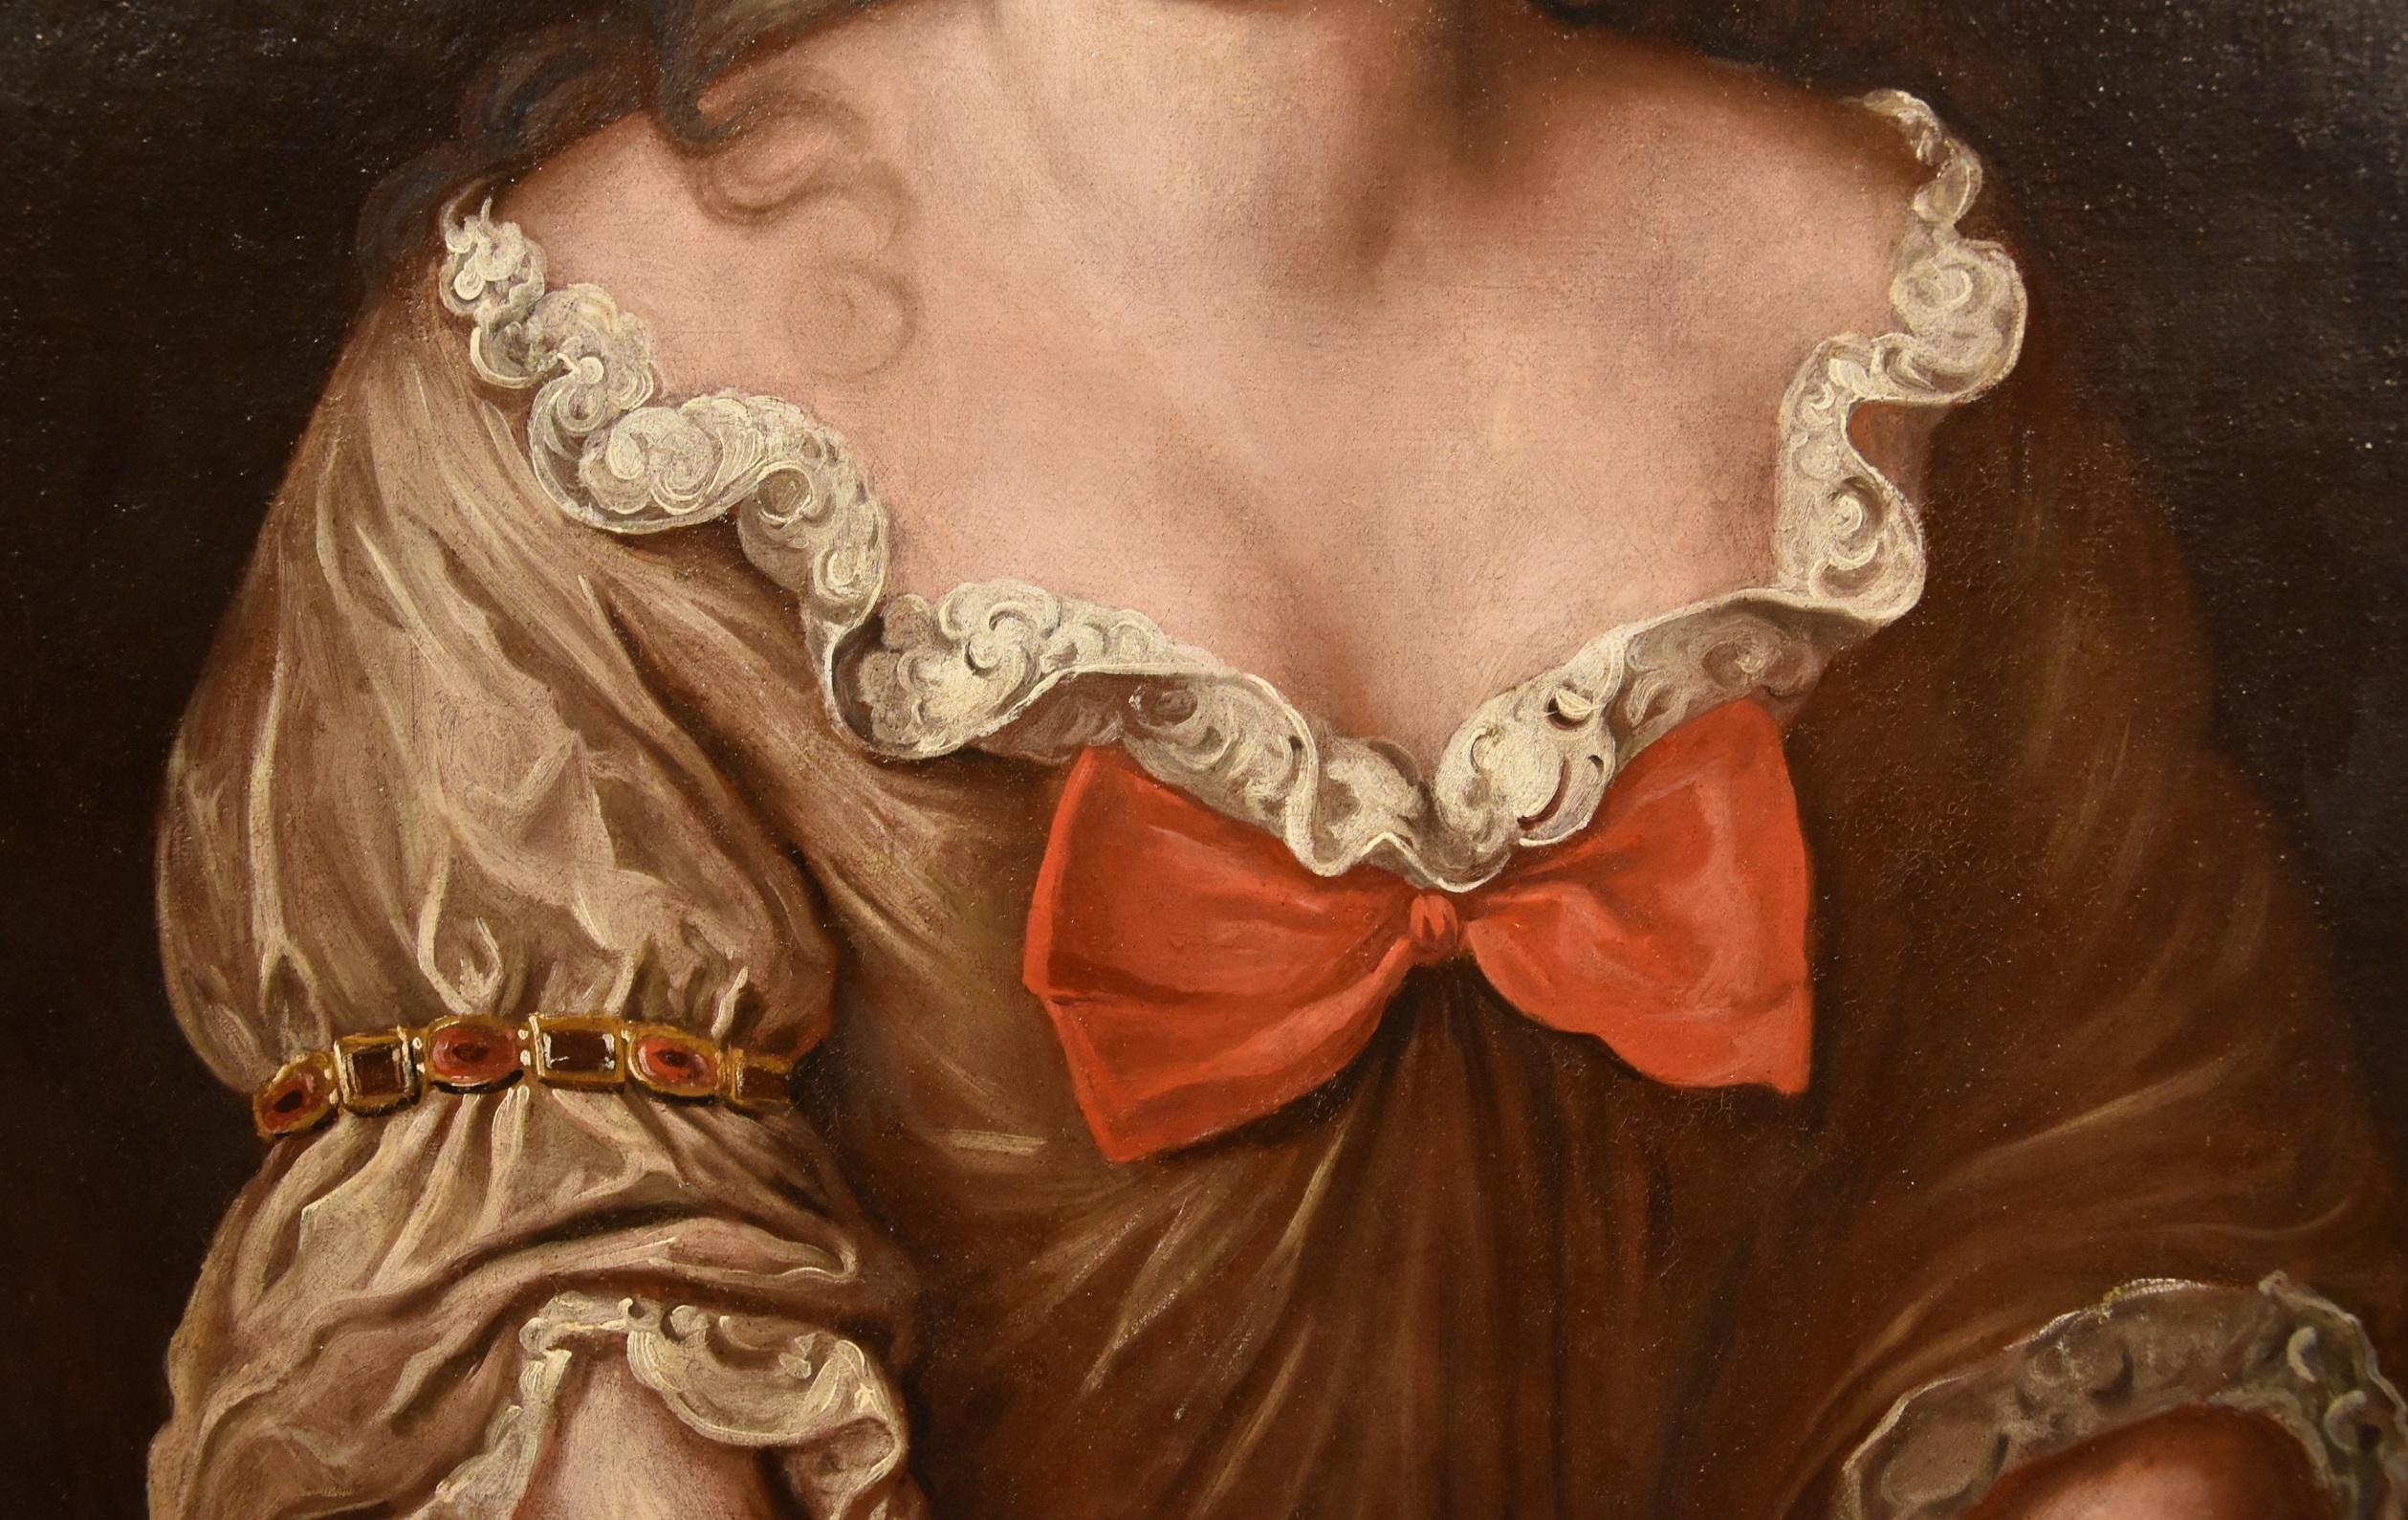 Jacob Ferdinand Voet (Antwerp 1639 - Paris 1689) Circle of
Portrait of a lady with a red bow and a jeweled diadem around her arm

oil on canvas, 74 x 61 cm.
precious coeval frame in gilded wood 86 x 72 cm.

The beautiful painting proposed, depicting